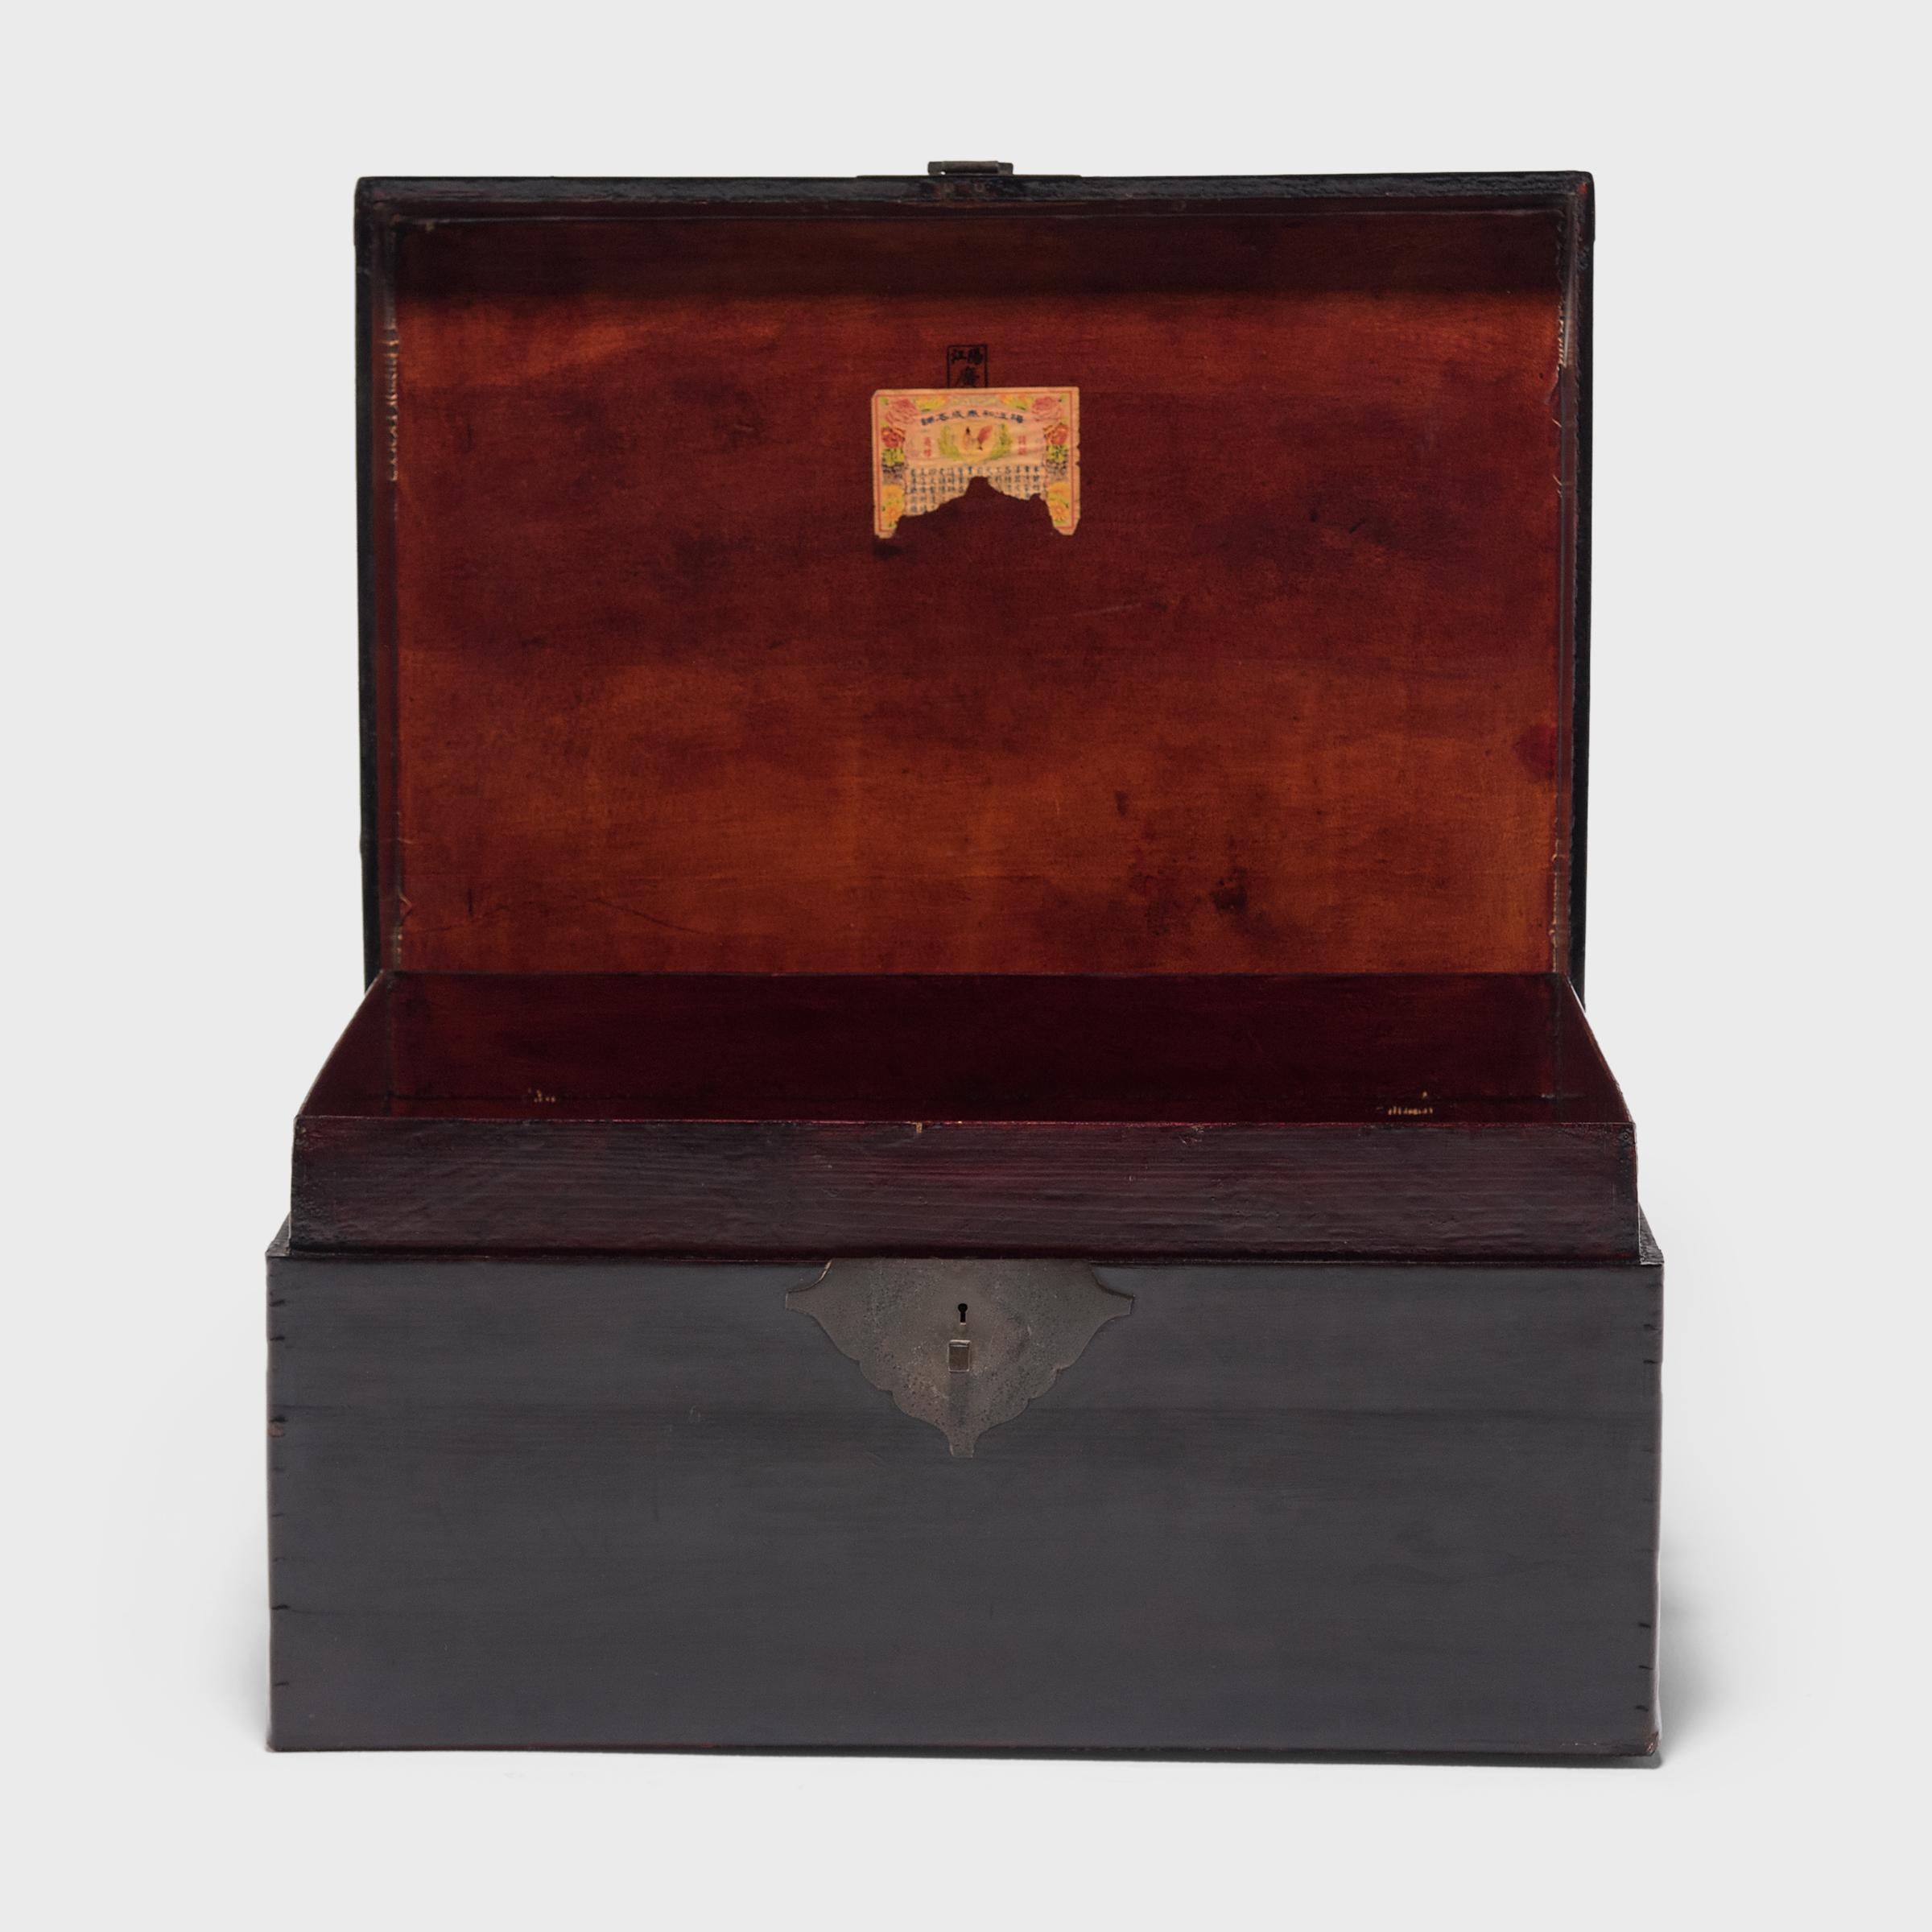 20th Century Chinese Black Lacquer Hide Trunk, c. 1900